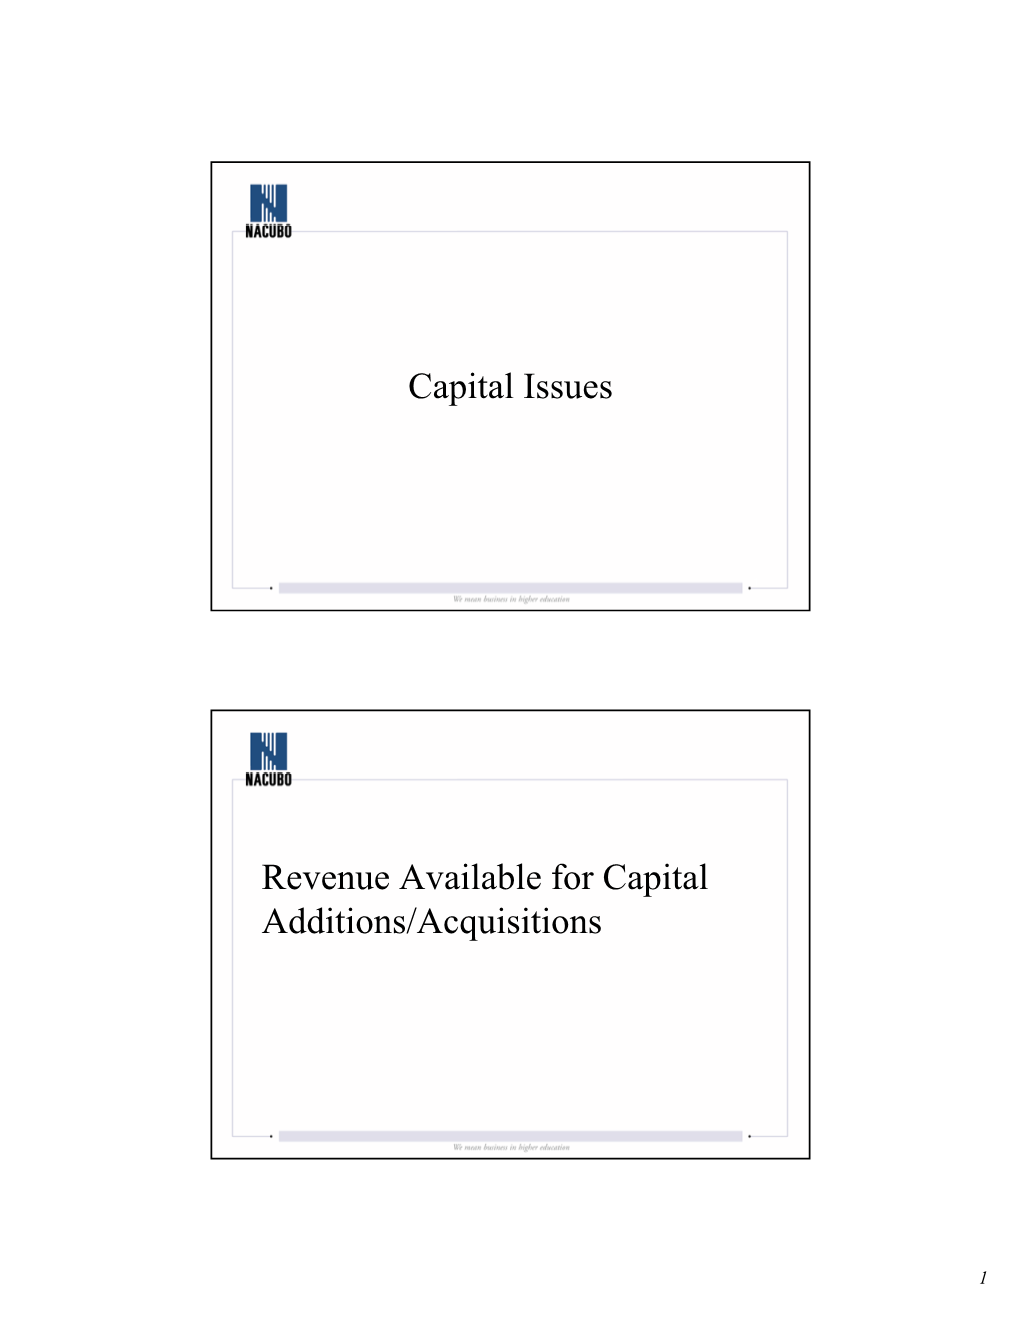 Capital Issues Revenue Available for Capital Additions/Acquisitions